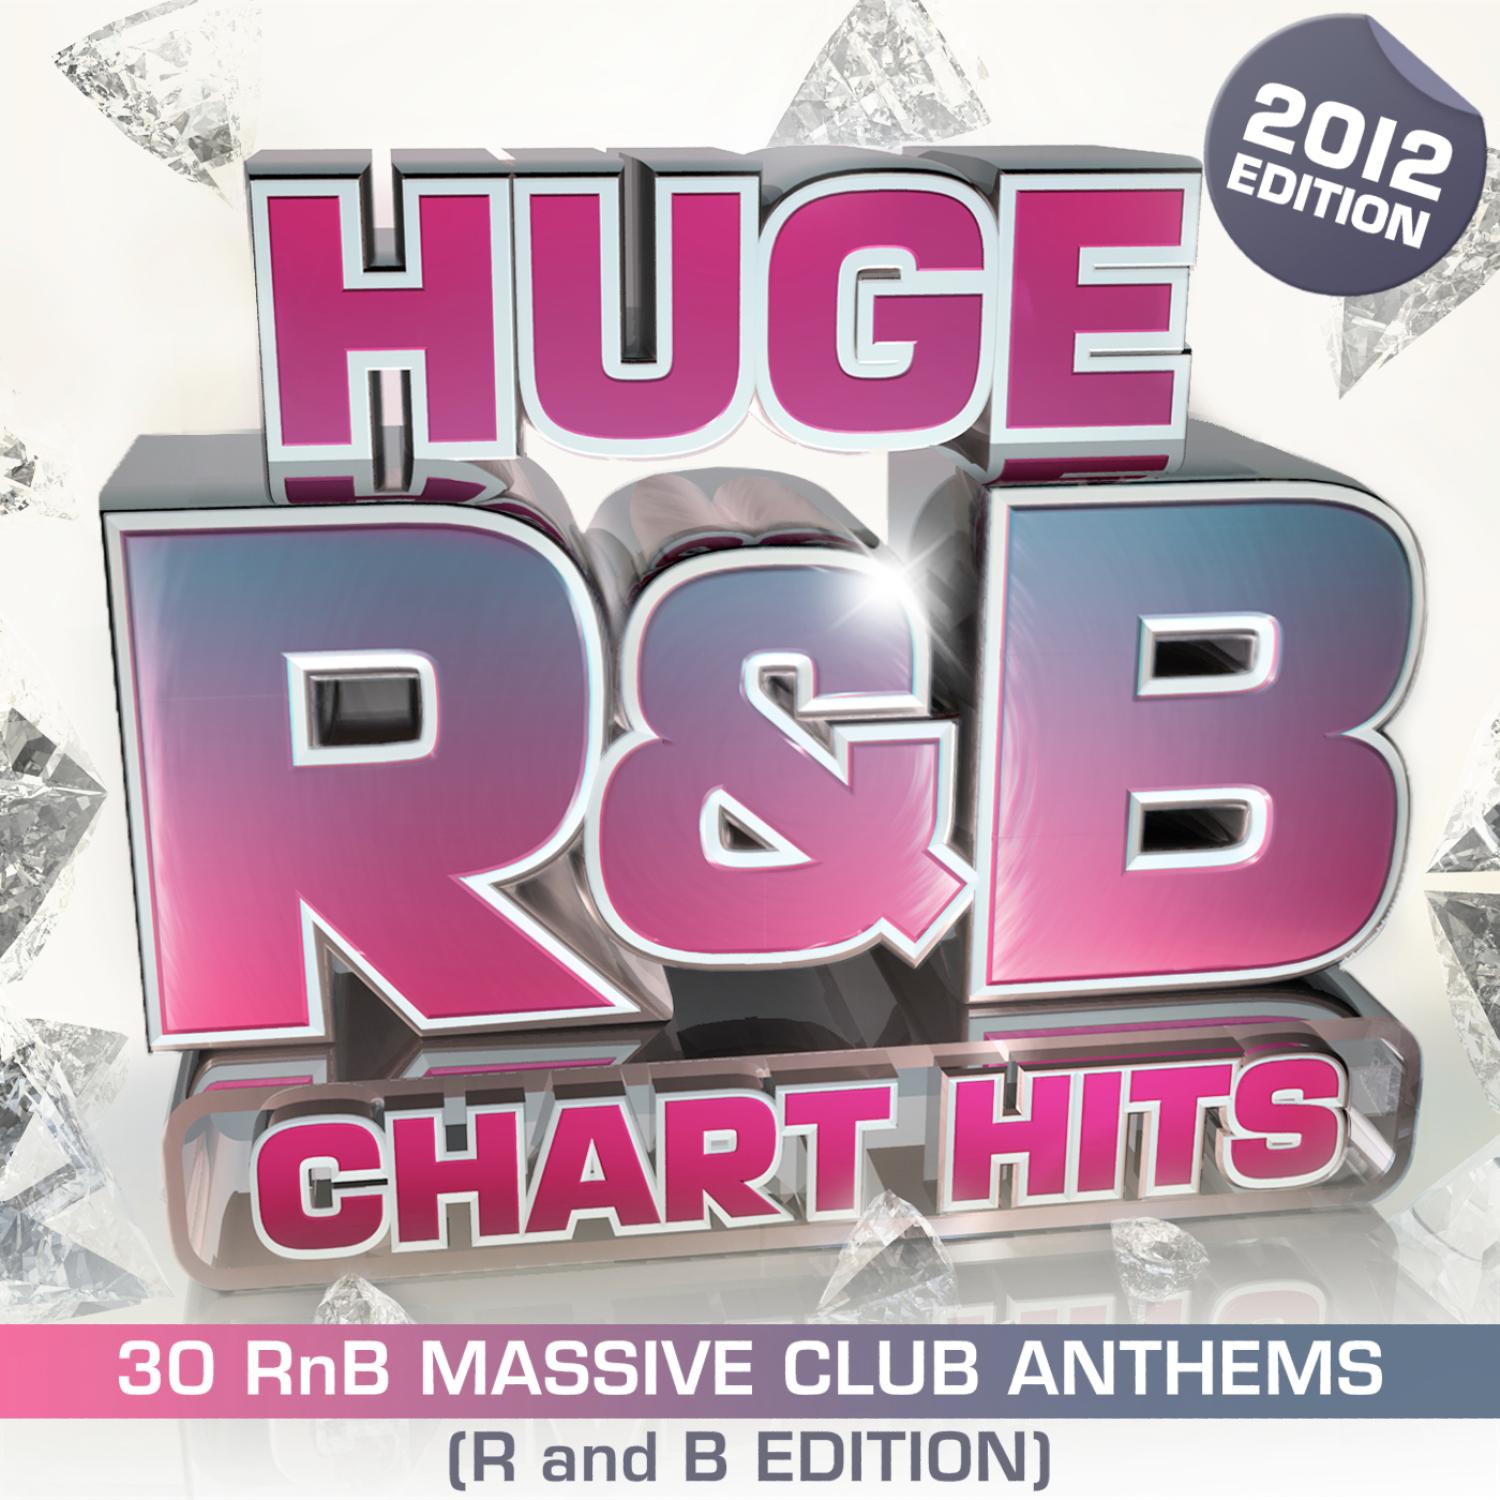 Huge R&B Chart Hits 2012 - 30 RnB Massive Club Anthems for 2012 ! ( R and B )